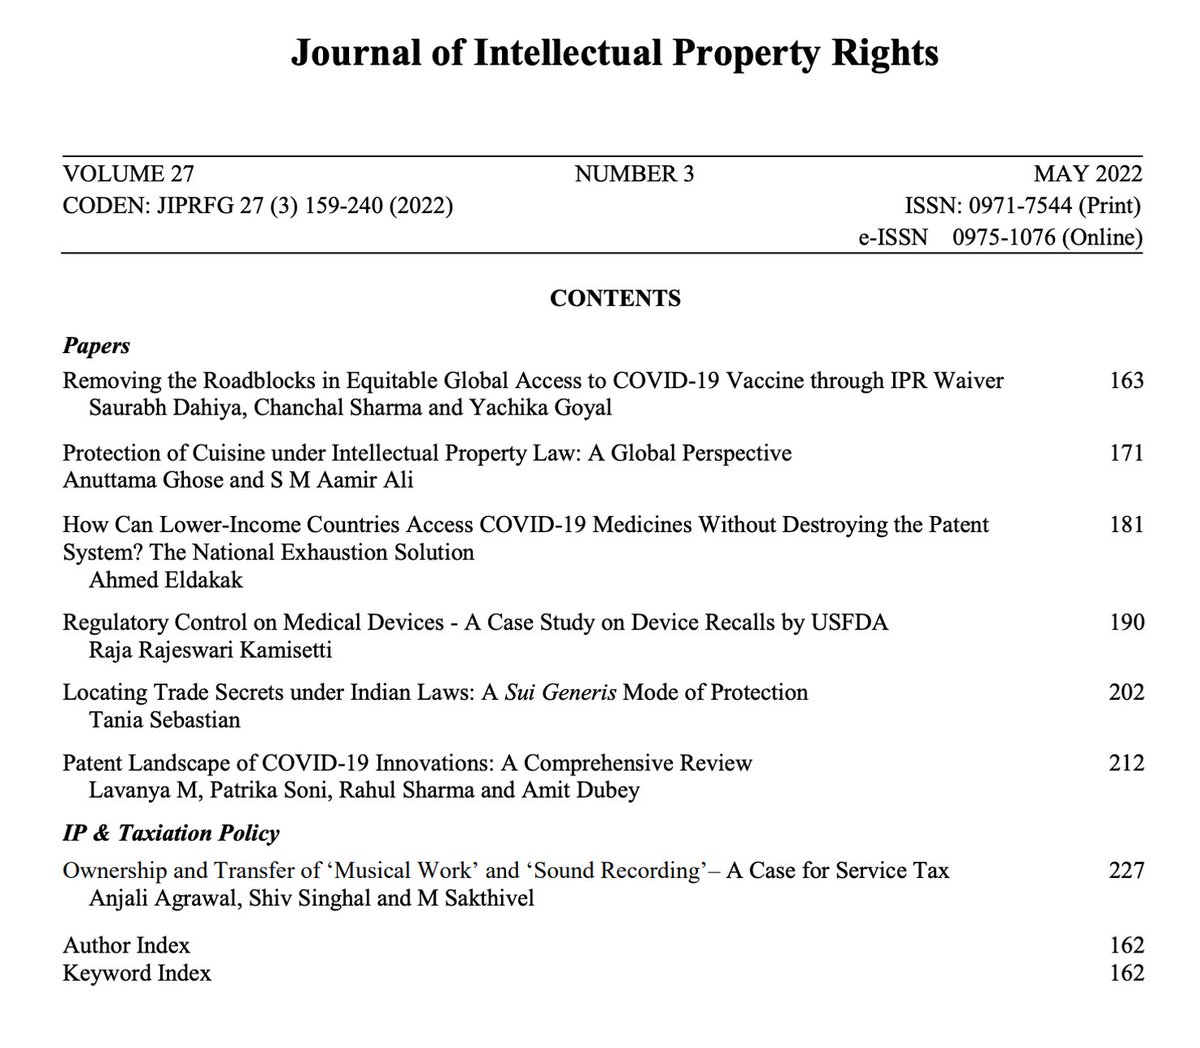 #JustPublished
May-June 2022 issue of @CSIR_NIScPR's #Journal of #IntellectualProperty Rights

#Journal #OpenAccess at: nopr.niscpr.res.in/handle/1234567…

#IPR @Ranjana_23 @DrKanikaMalik1 @CSIR_IND #ResearchJournals #AcademicPublishing